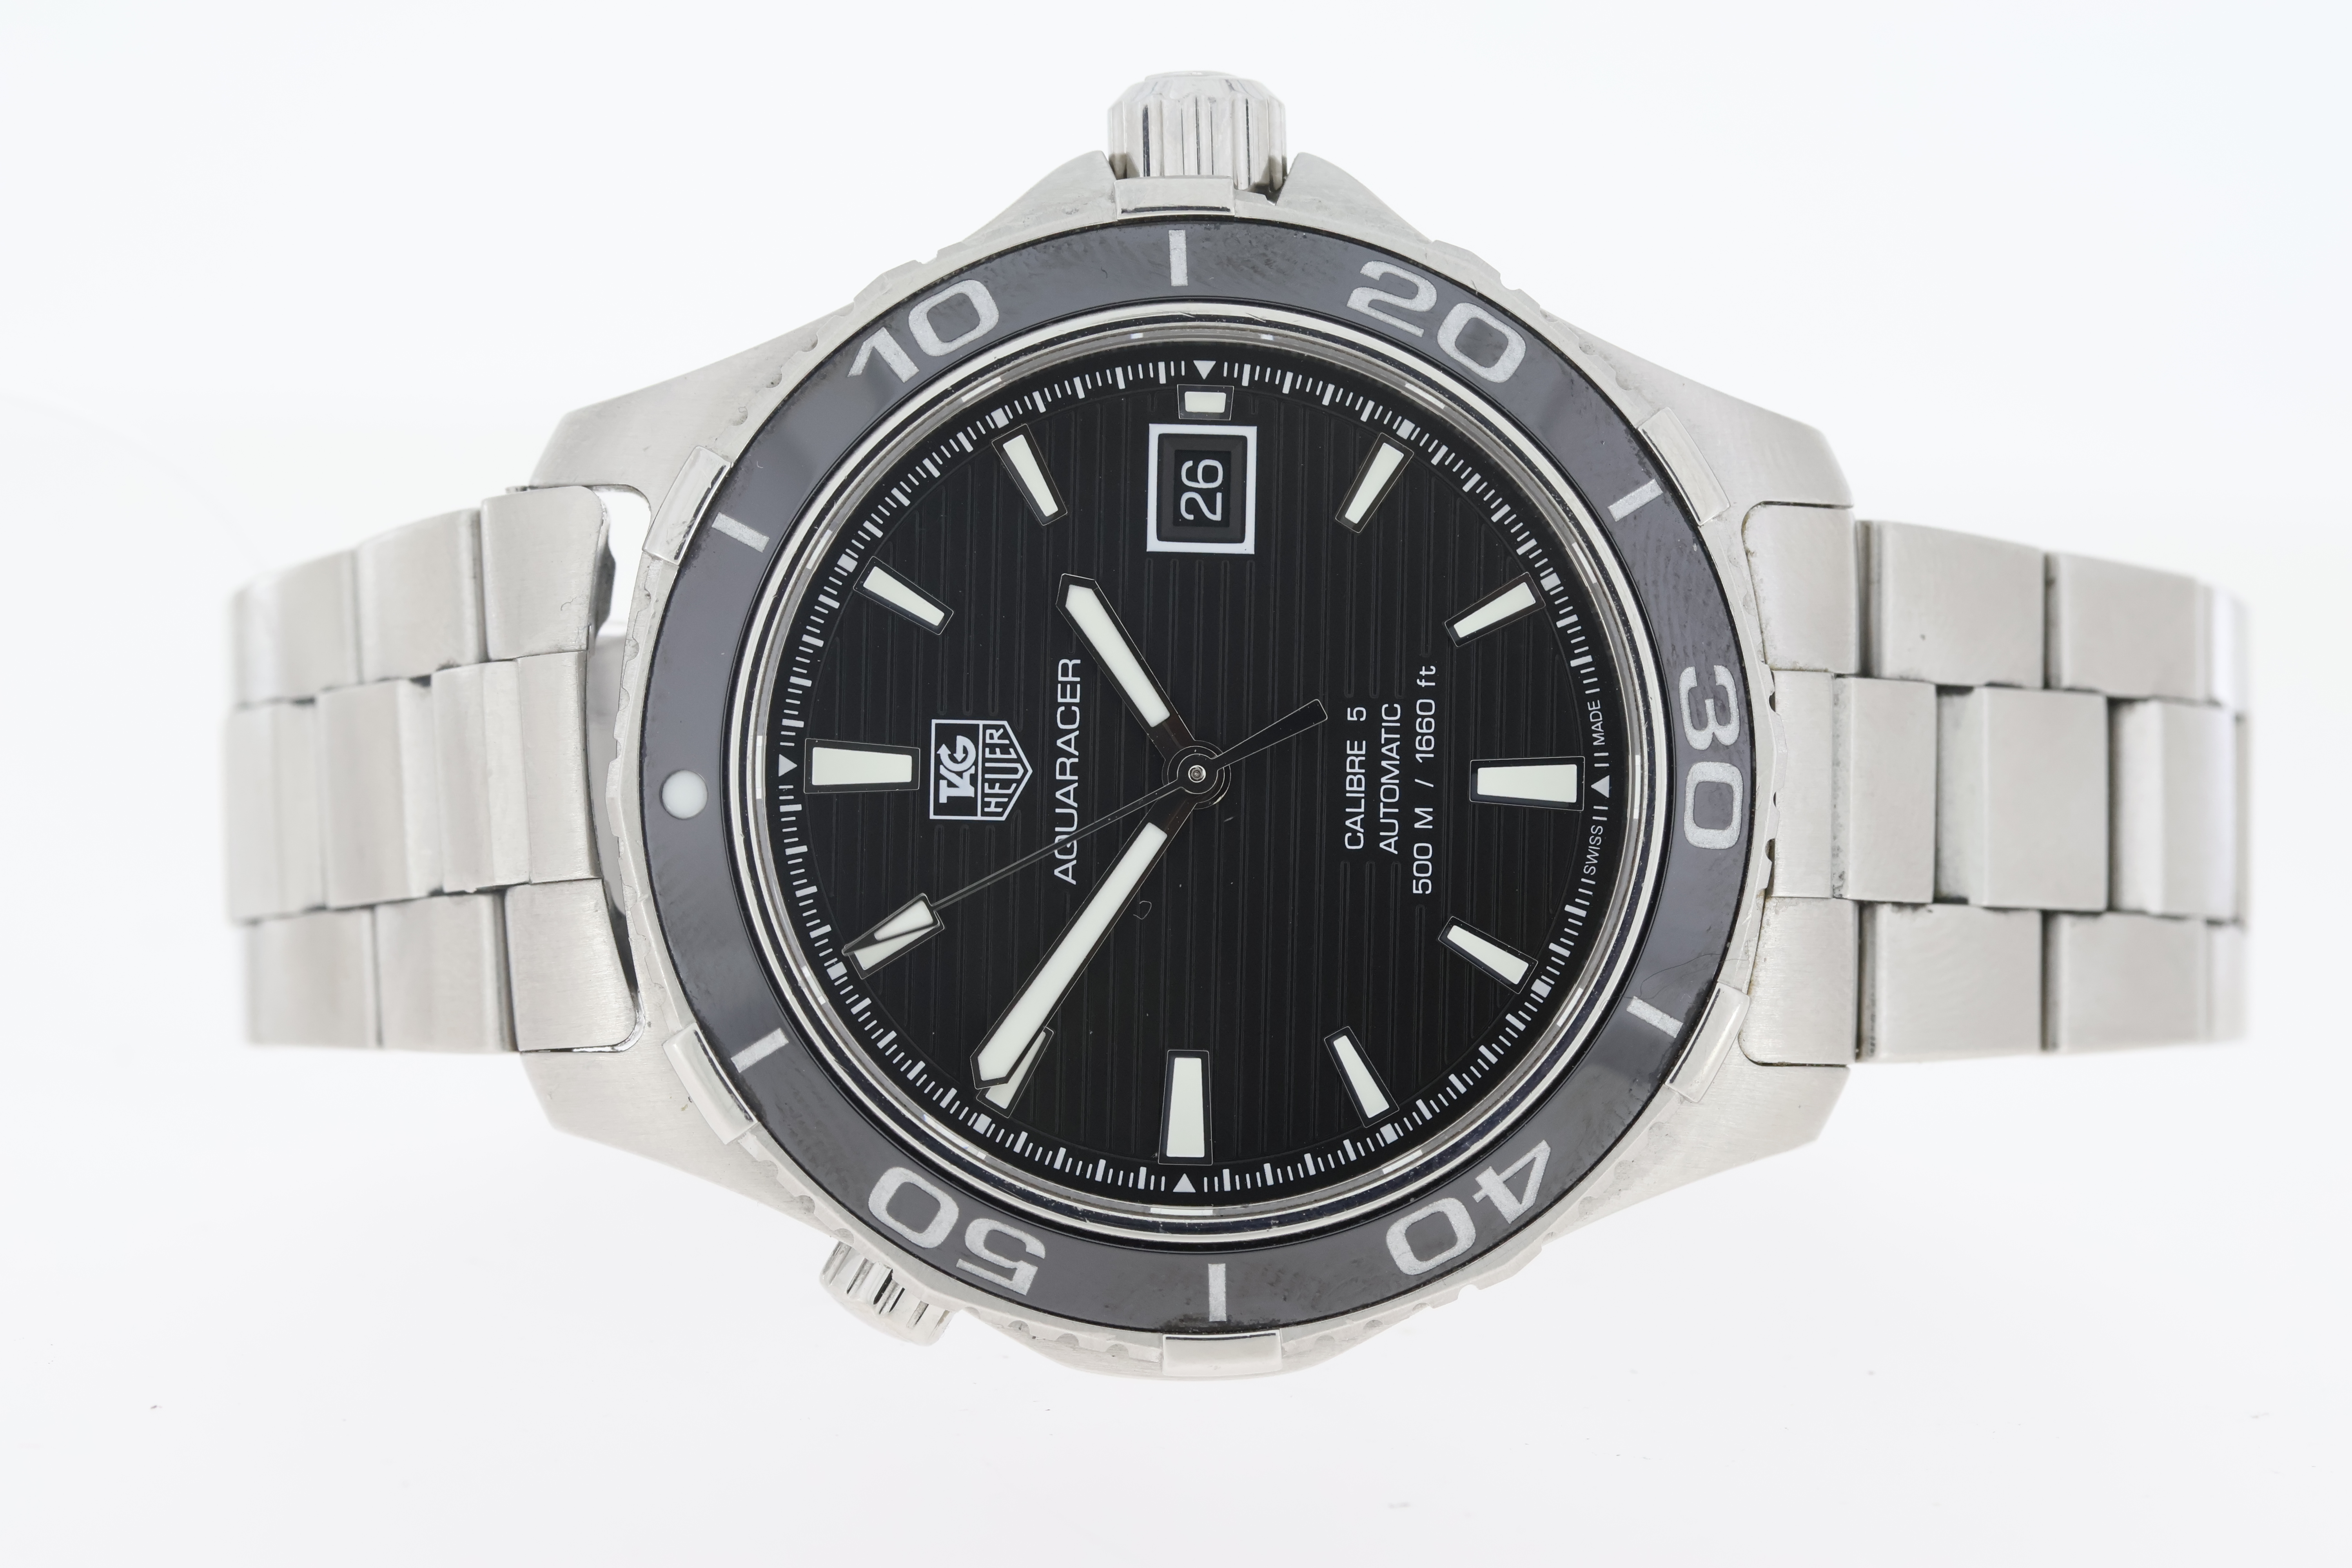 Tag Heuer Aquaracer Date Automatic - Image 2 of 4